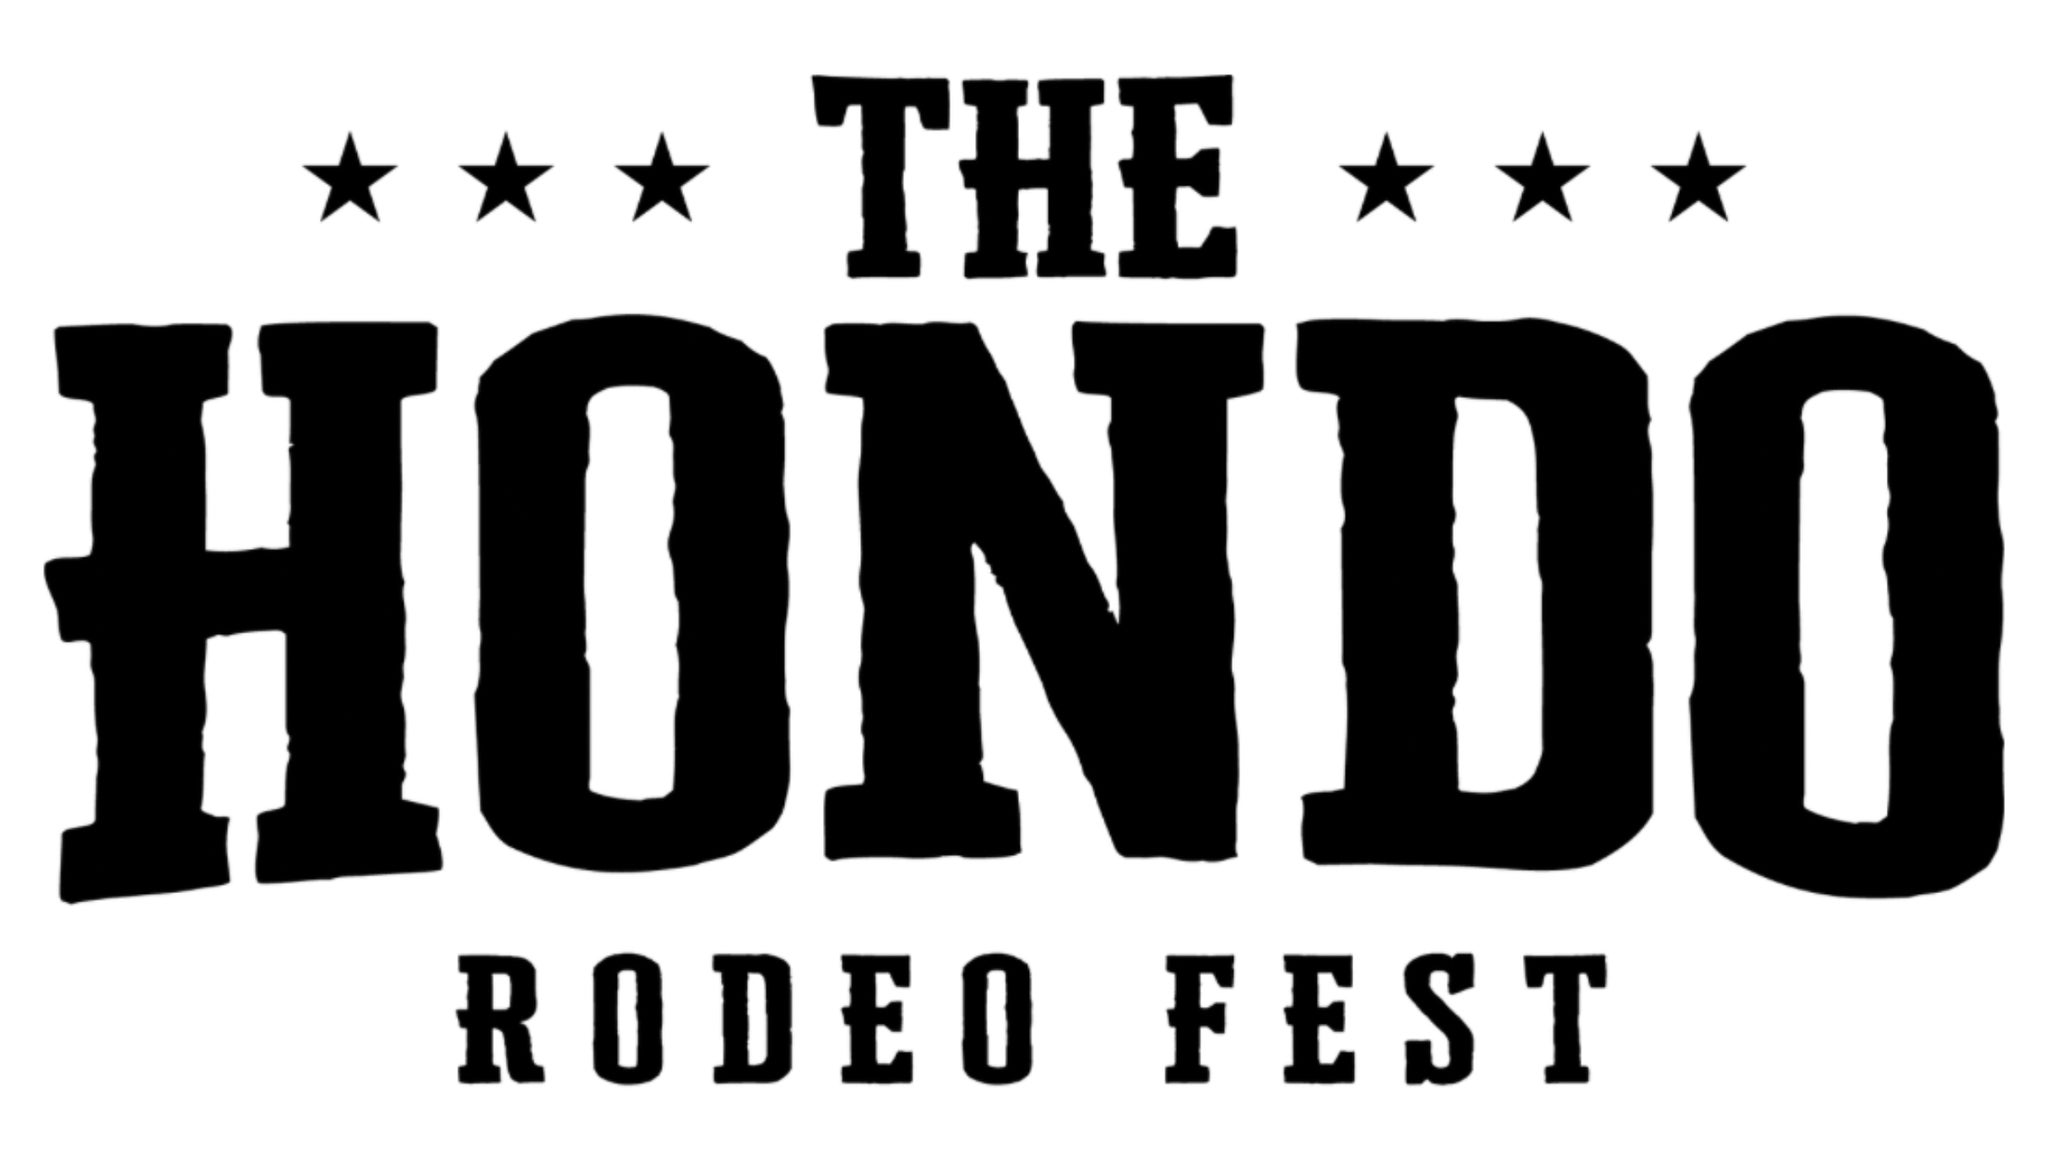 The Hondo Rodeo Fest - Round Three feat. Zac Brown Band